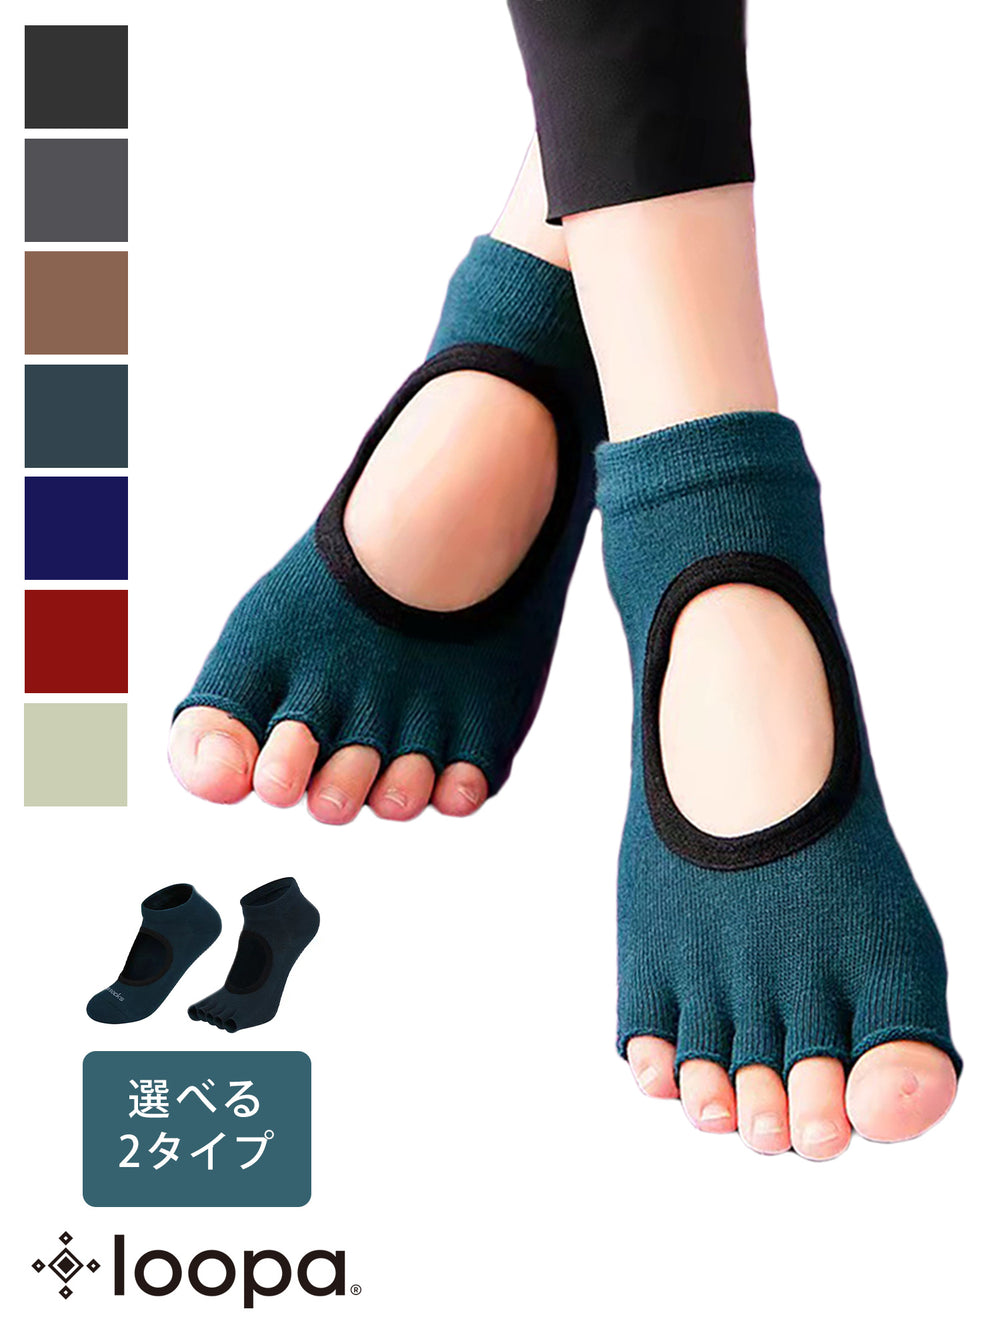 [Loopa] Grip Yoga Socks Socks / Non-Slip With Toes No Toes 5 Toes [A] 10_4